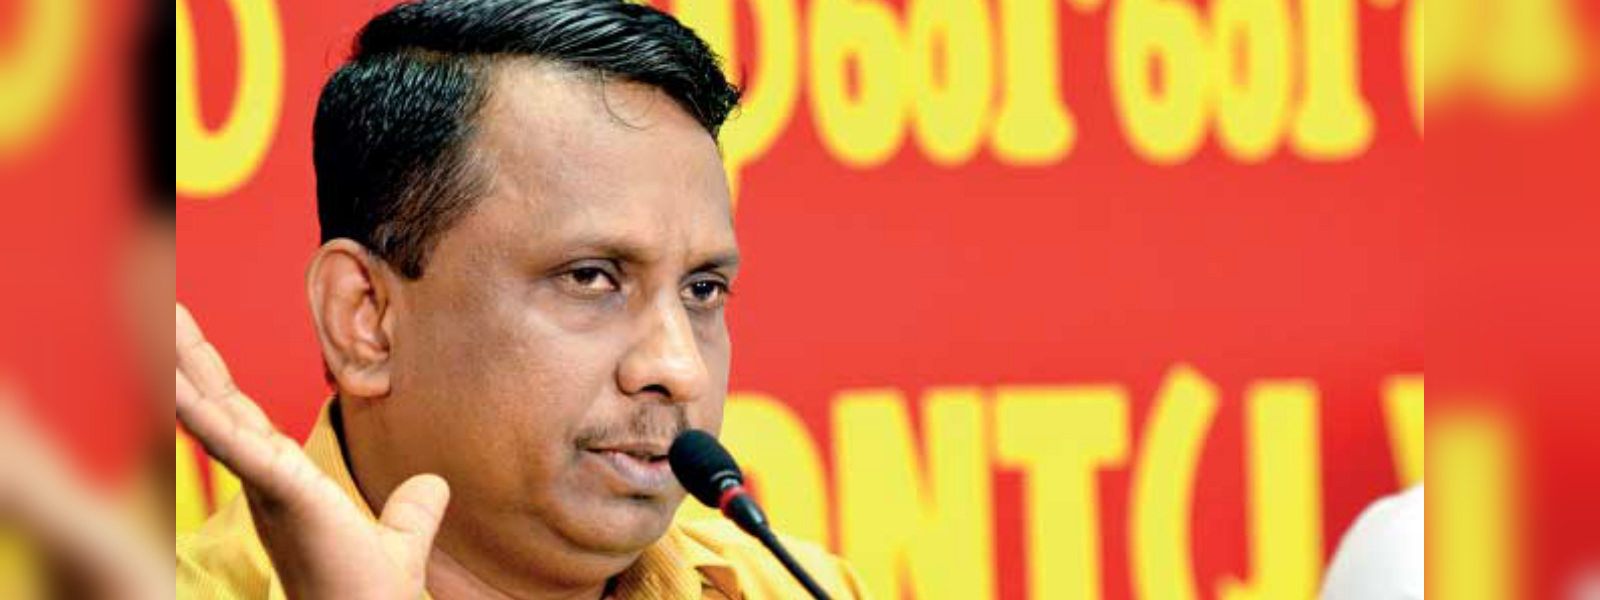 "Opposition Leader should be from the JVP"